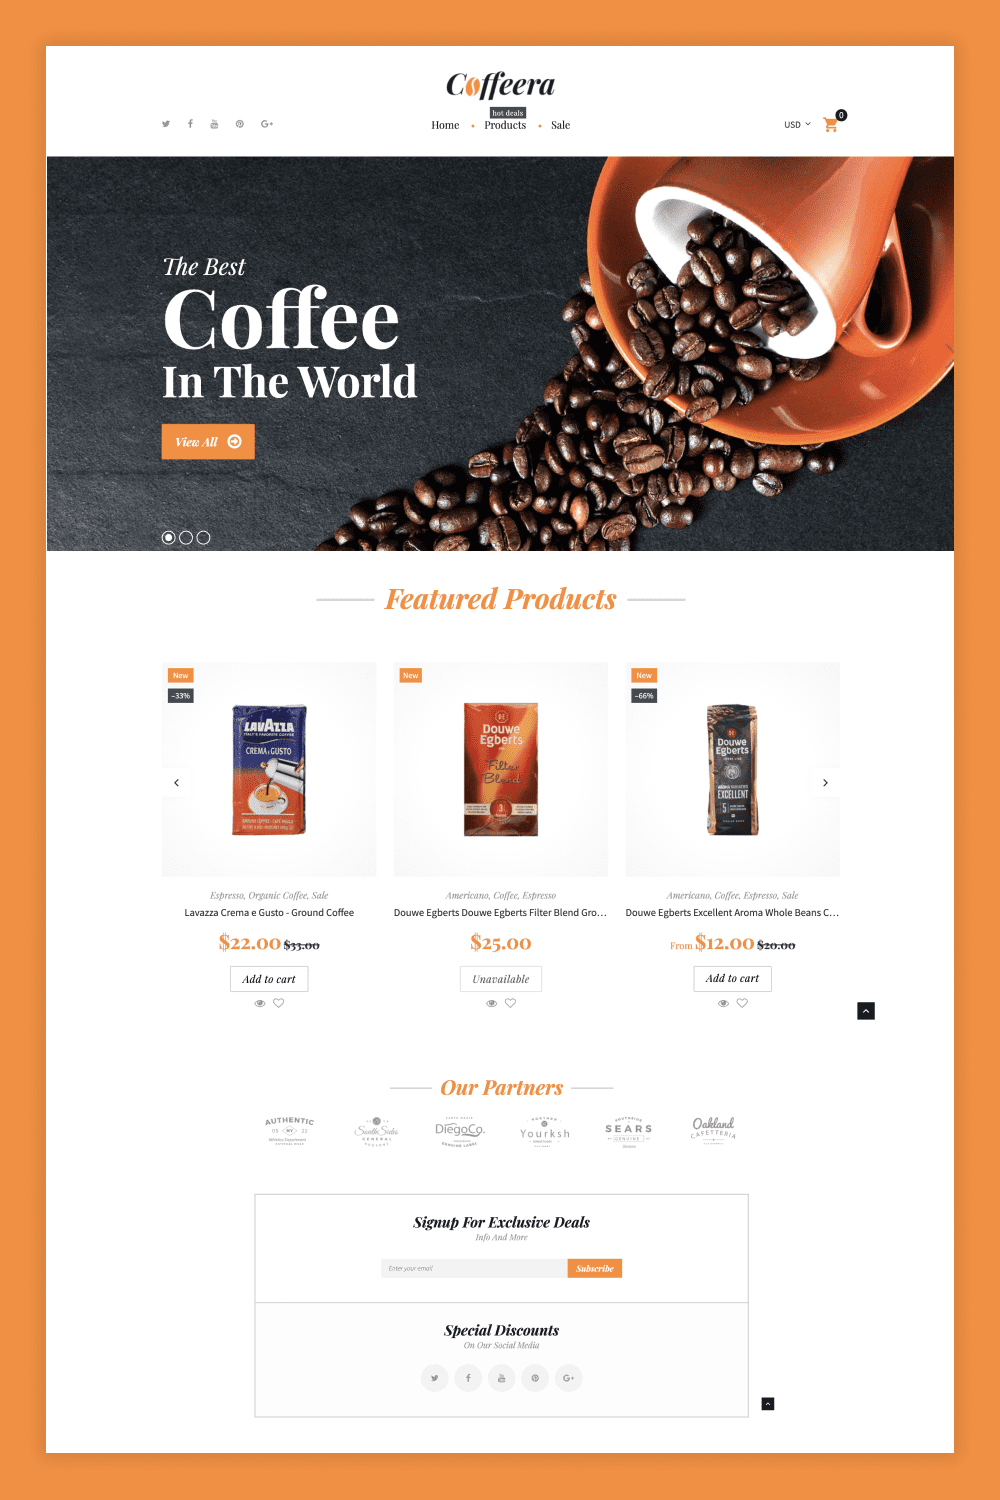 Screenshot of the main page of the store with a photo of coffee and coffee packs.